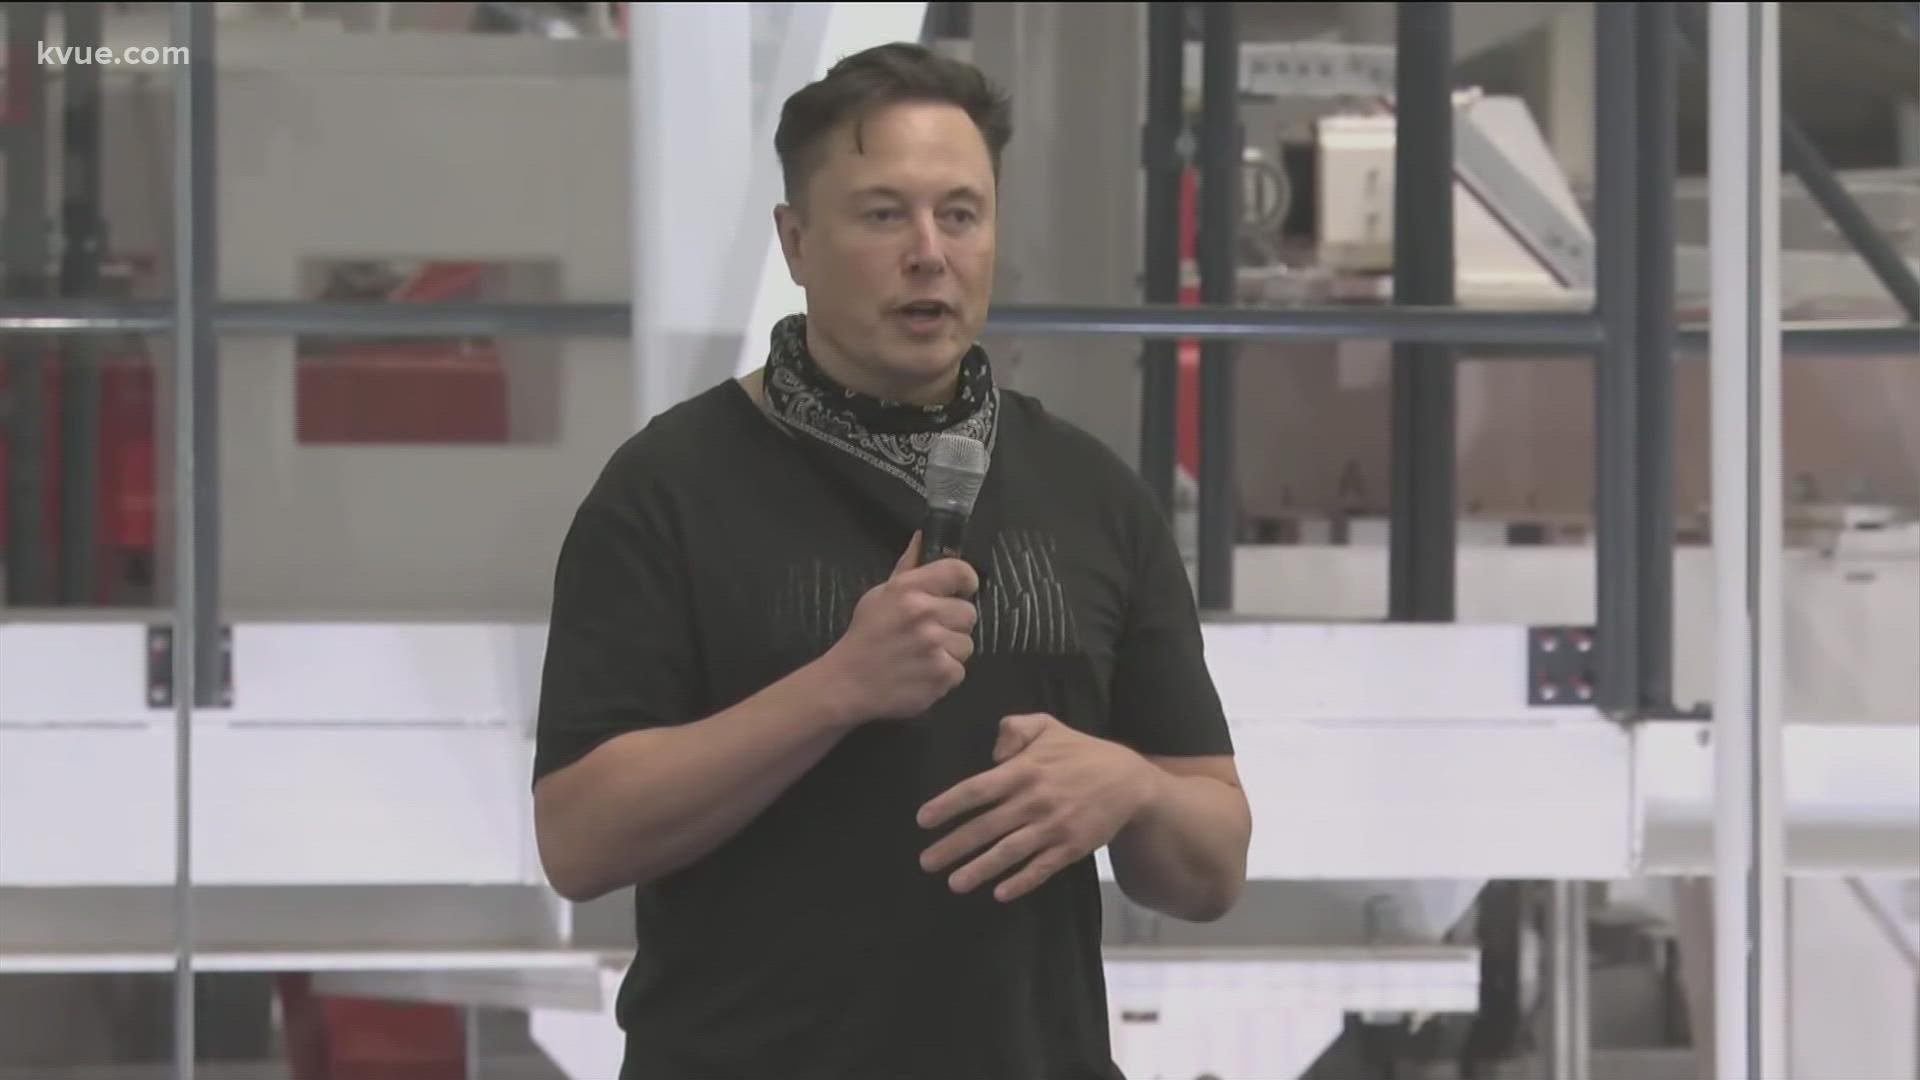 Musk nonchalantly made the announcement Thursday at a Tesla stockholders meeting.